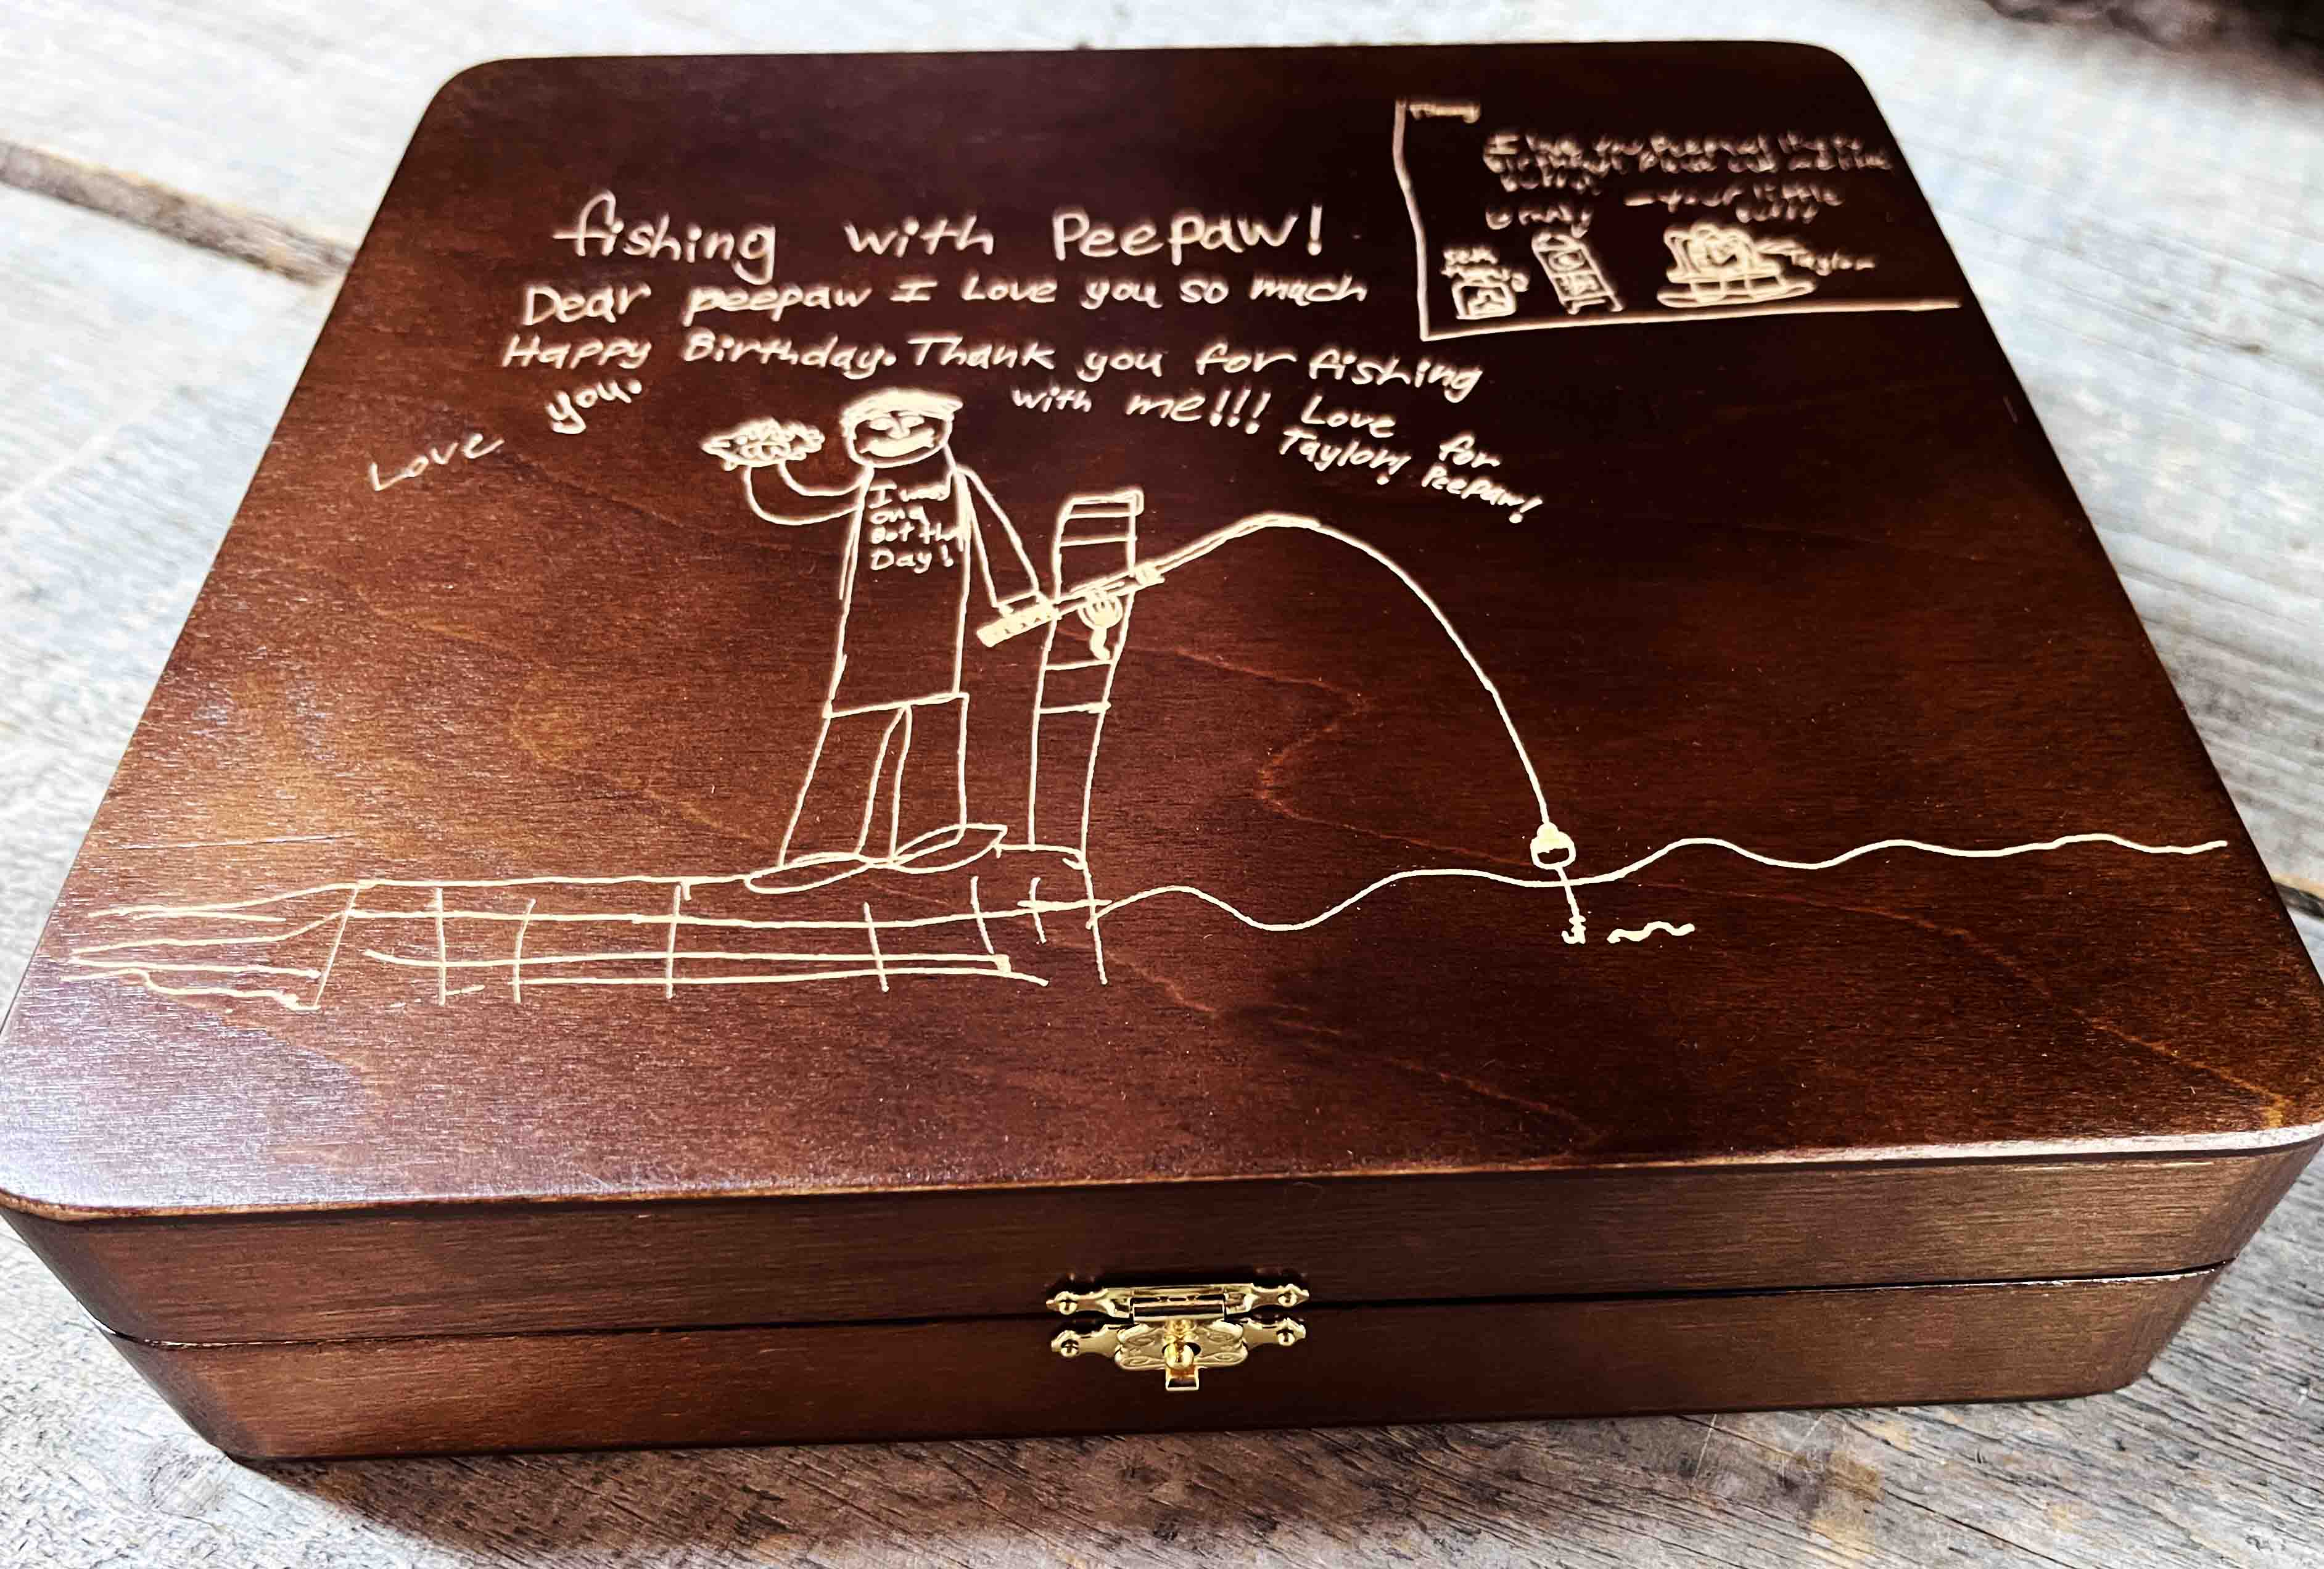 Handwriting Engraved into Premium Wooden Gift Box